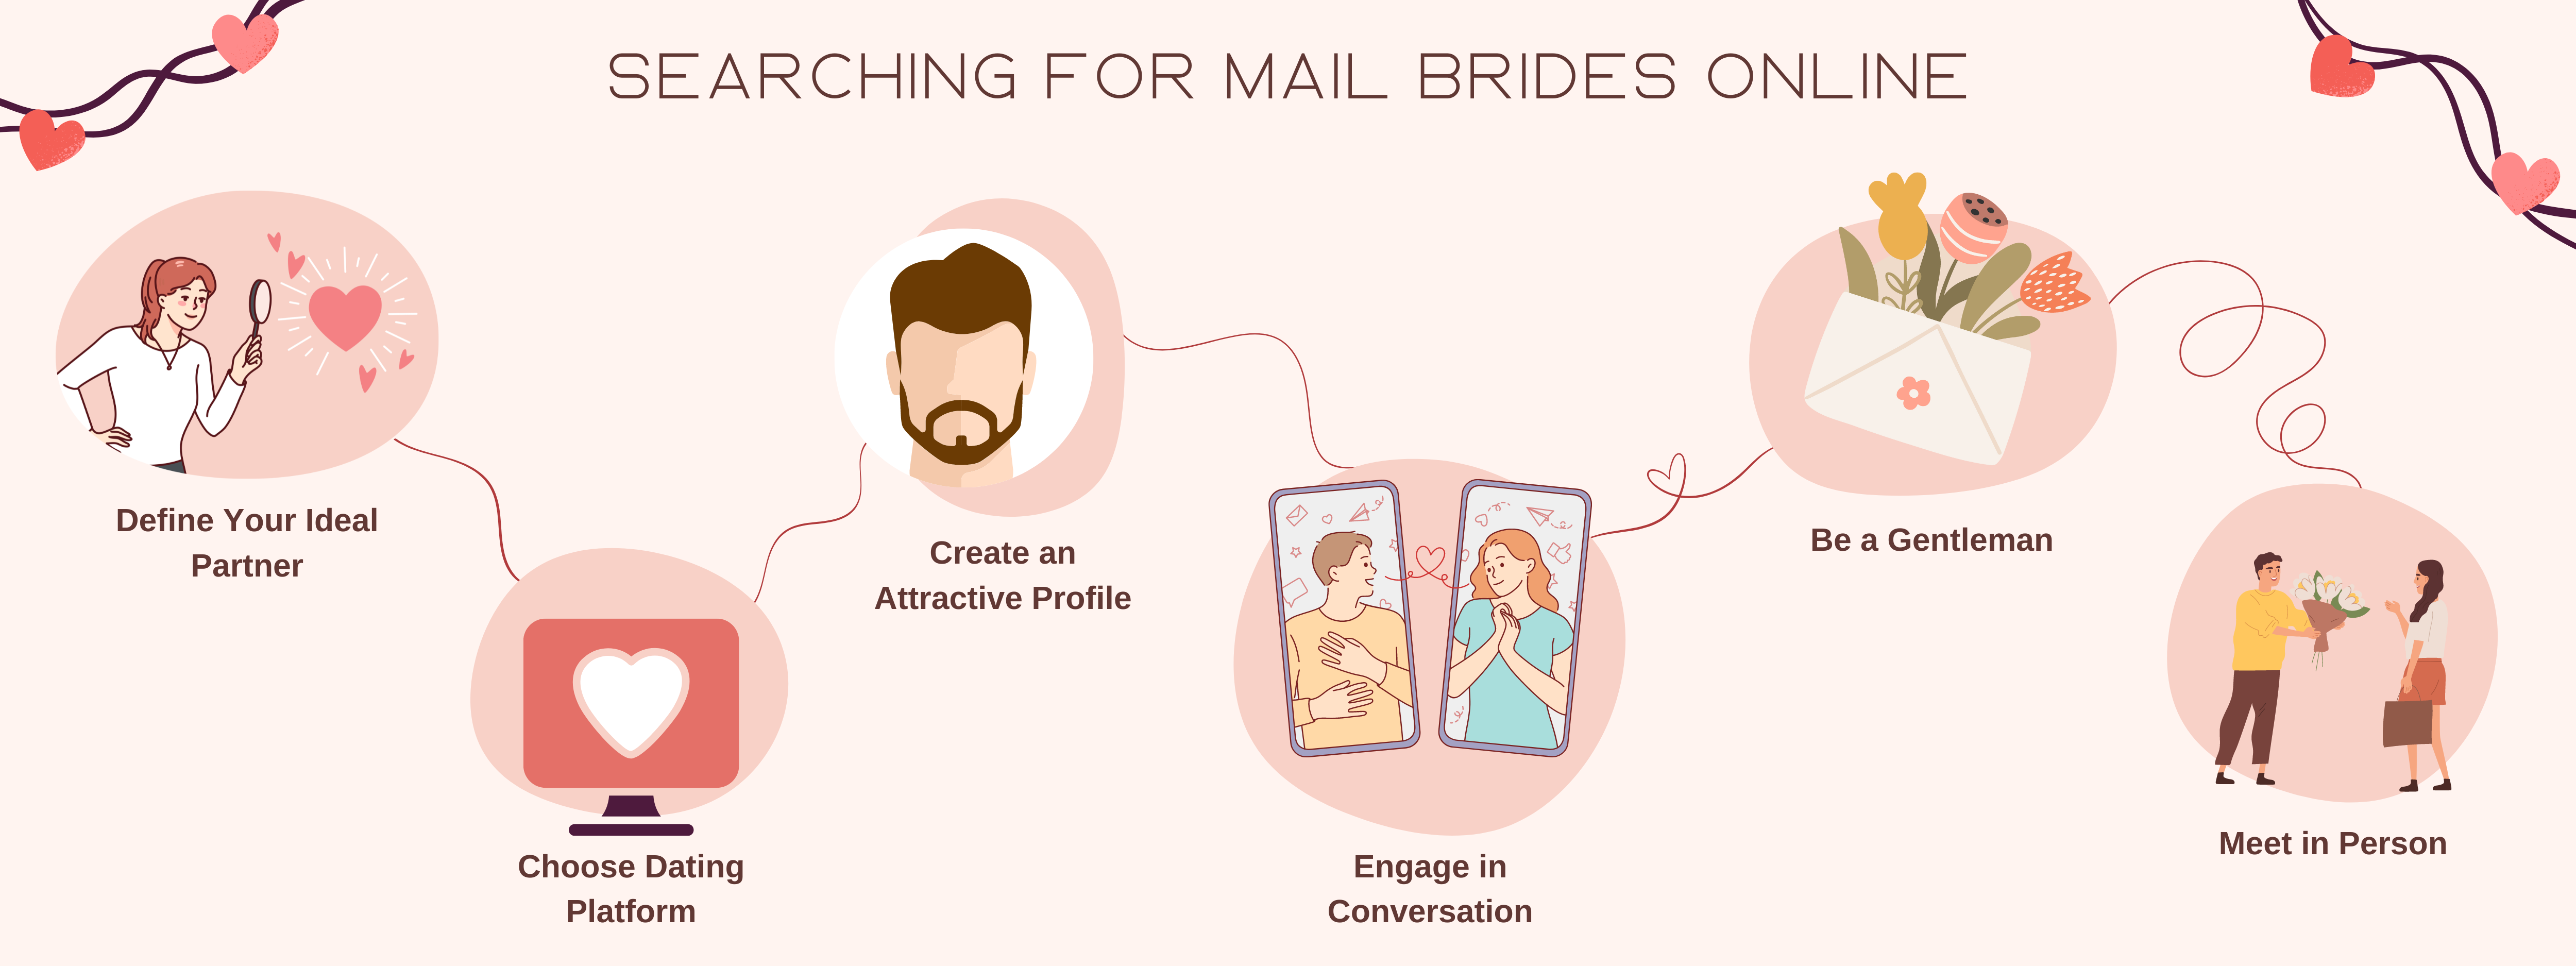 searching about mail order brides online infographic